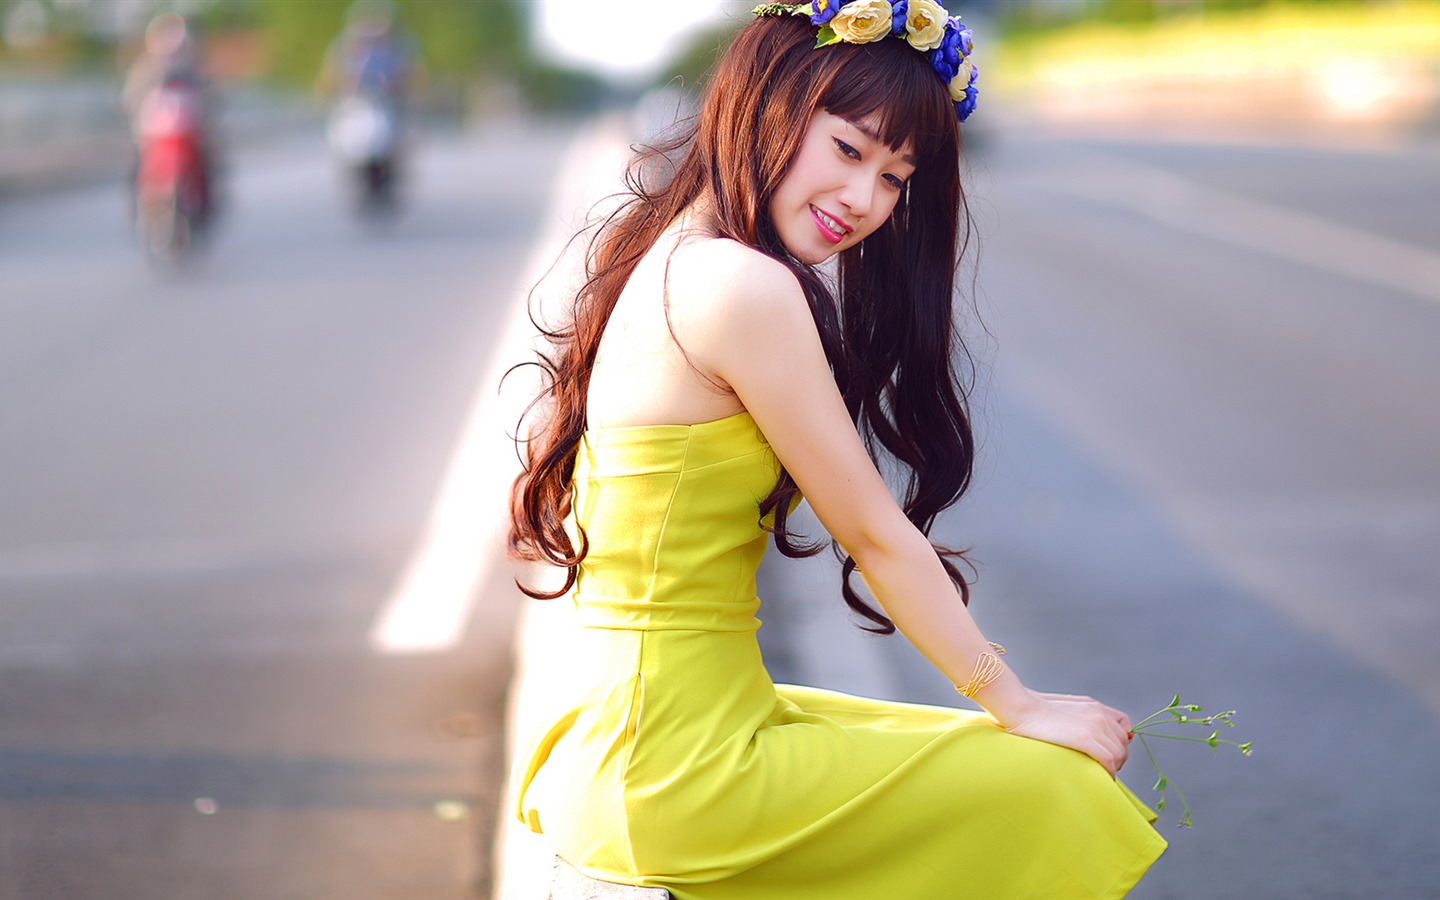 Pure and lovely young Asian girl HD wallpapers collection (2) #27 - 1440x900